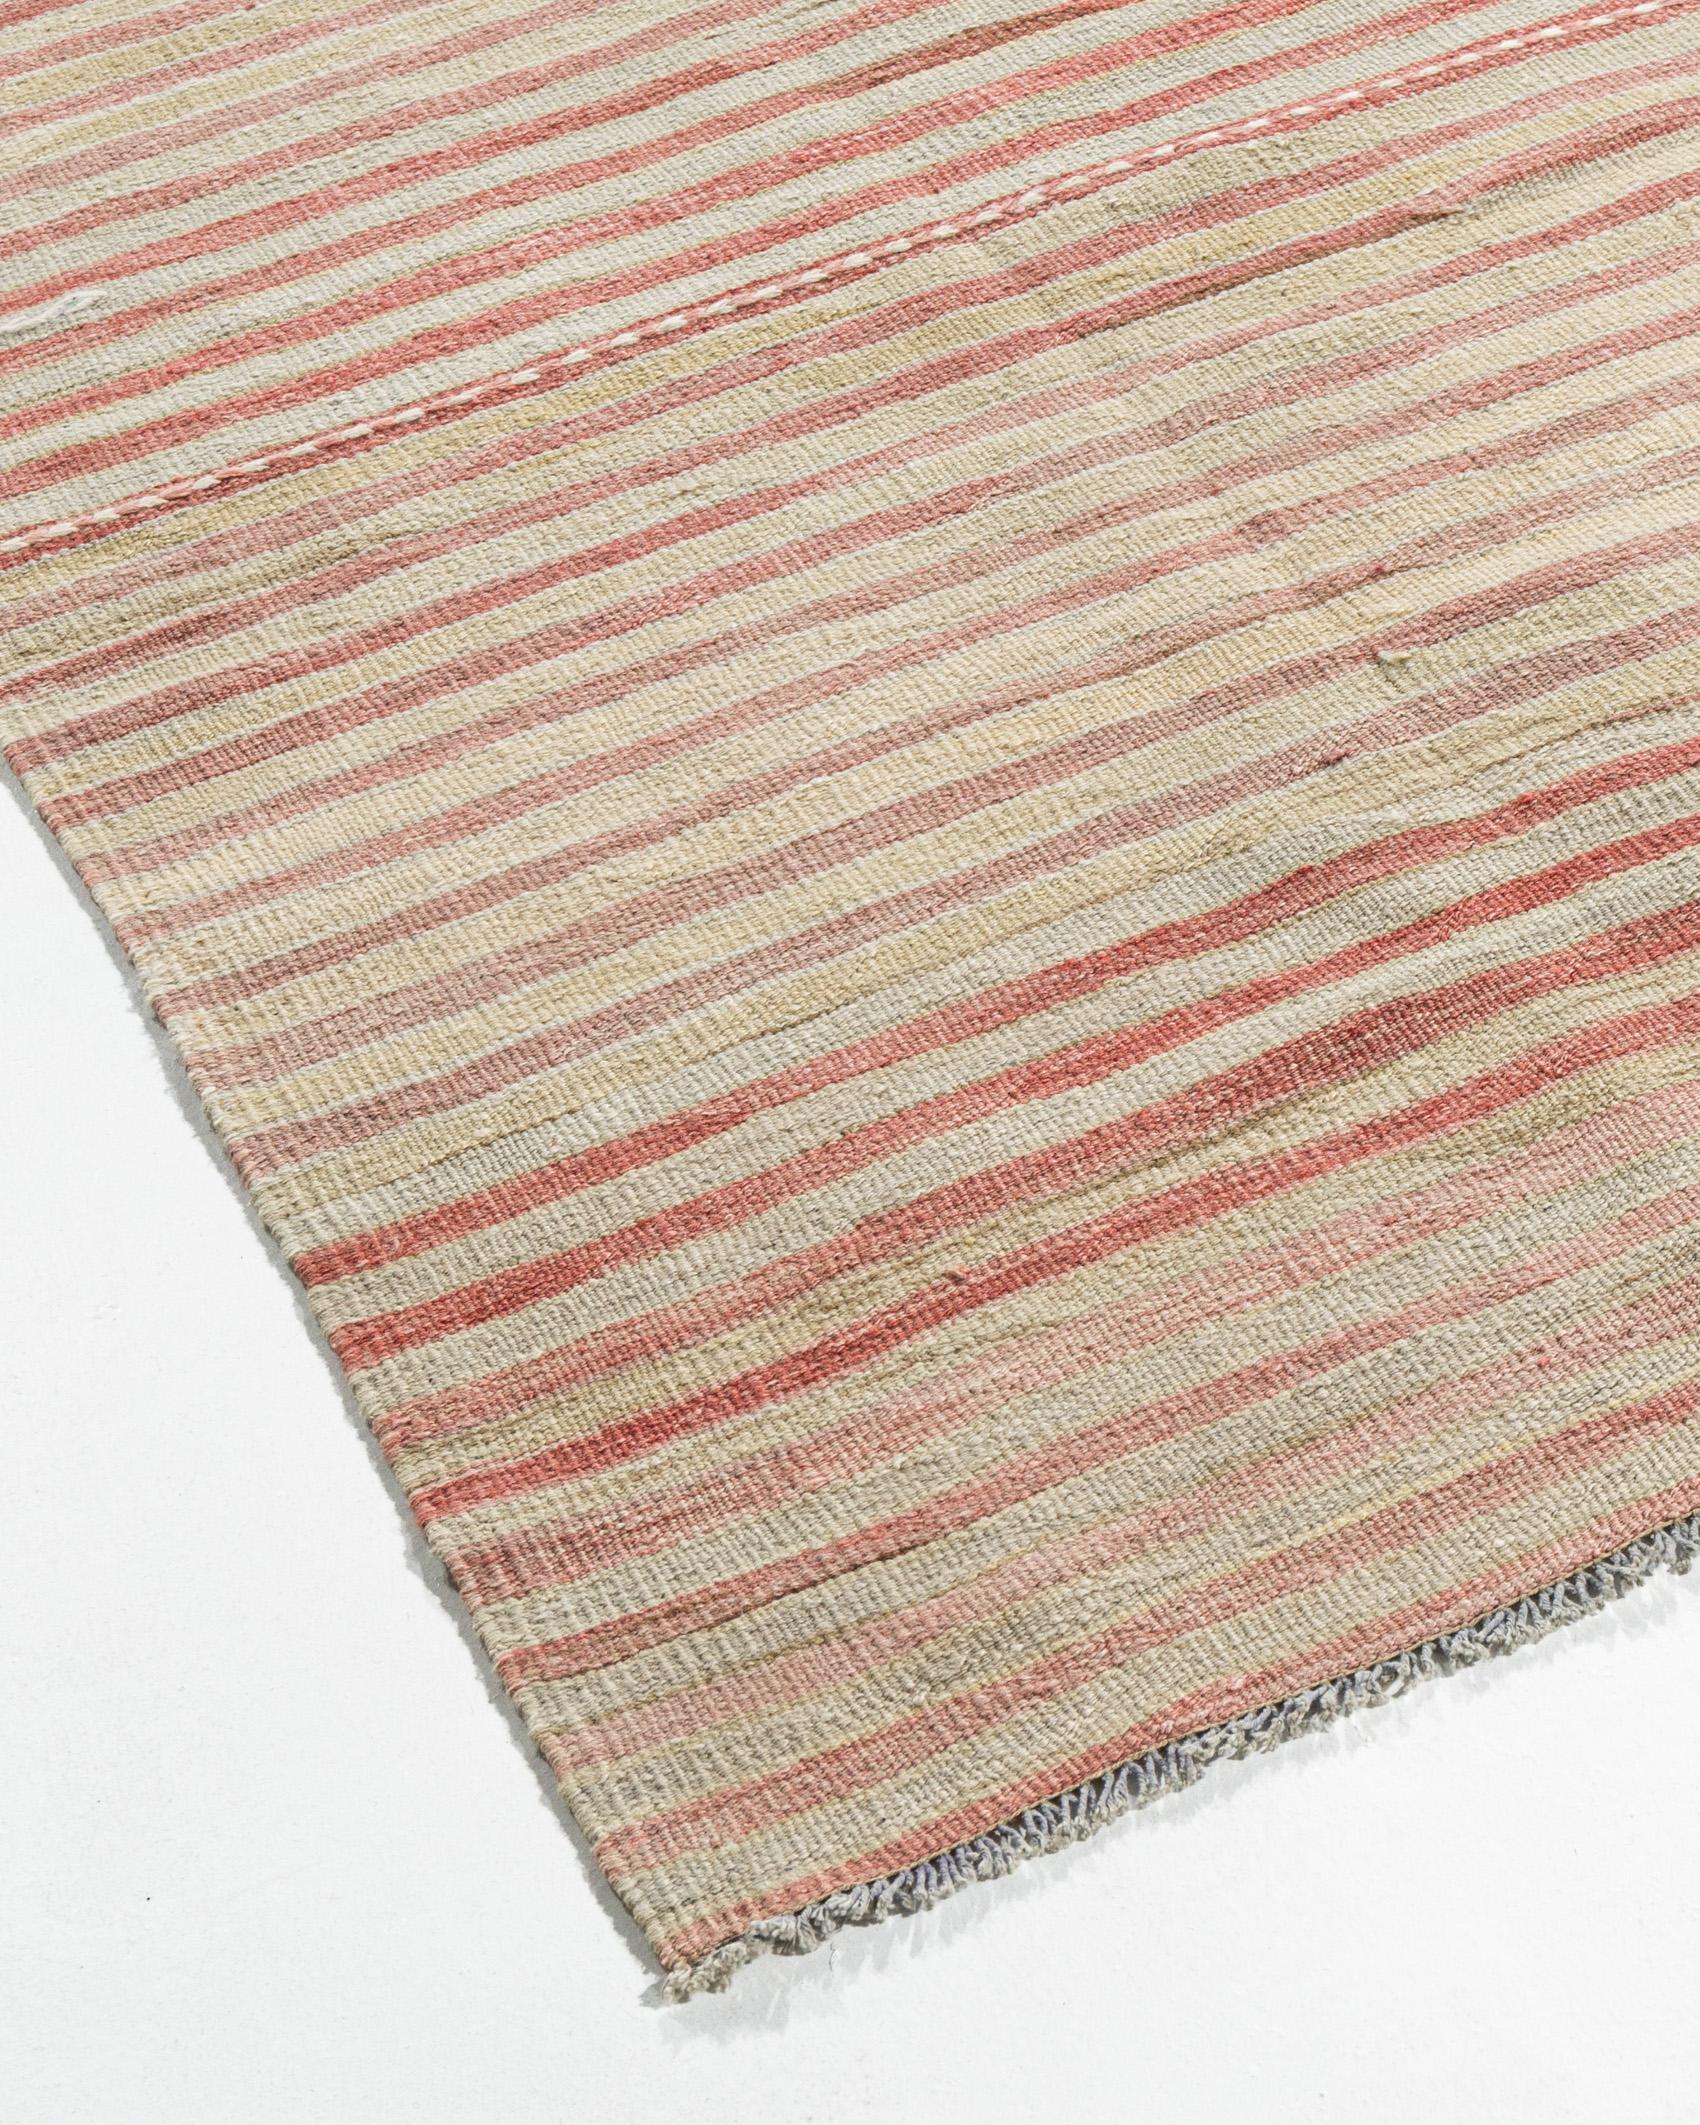 Vintage Turkish Kilim Area rug 4'9 X 9'4. This vintage Turkish flat weave Kilim was hand-woven in the 1940's. The simplicity and boldness of this piece can also give a contemporary feel and is able to look at home in both a modern and traditional